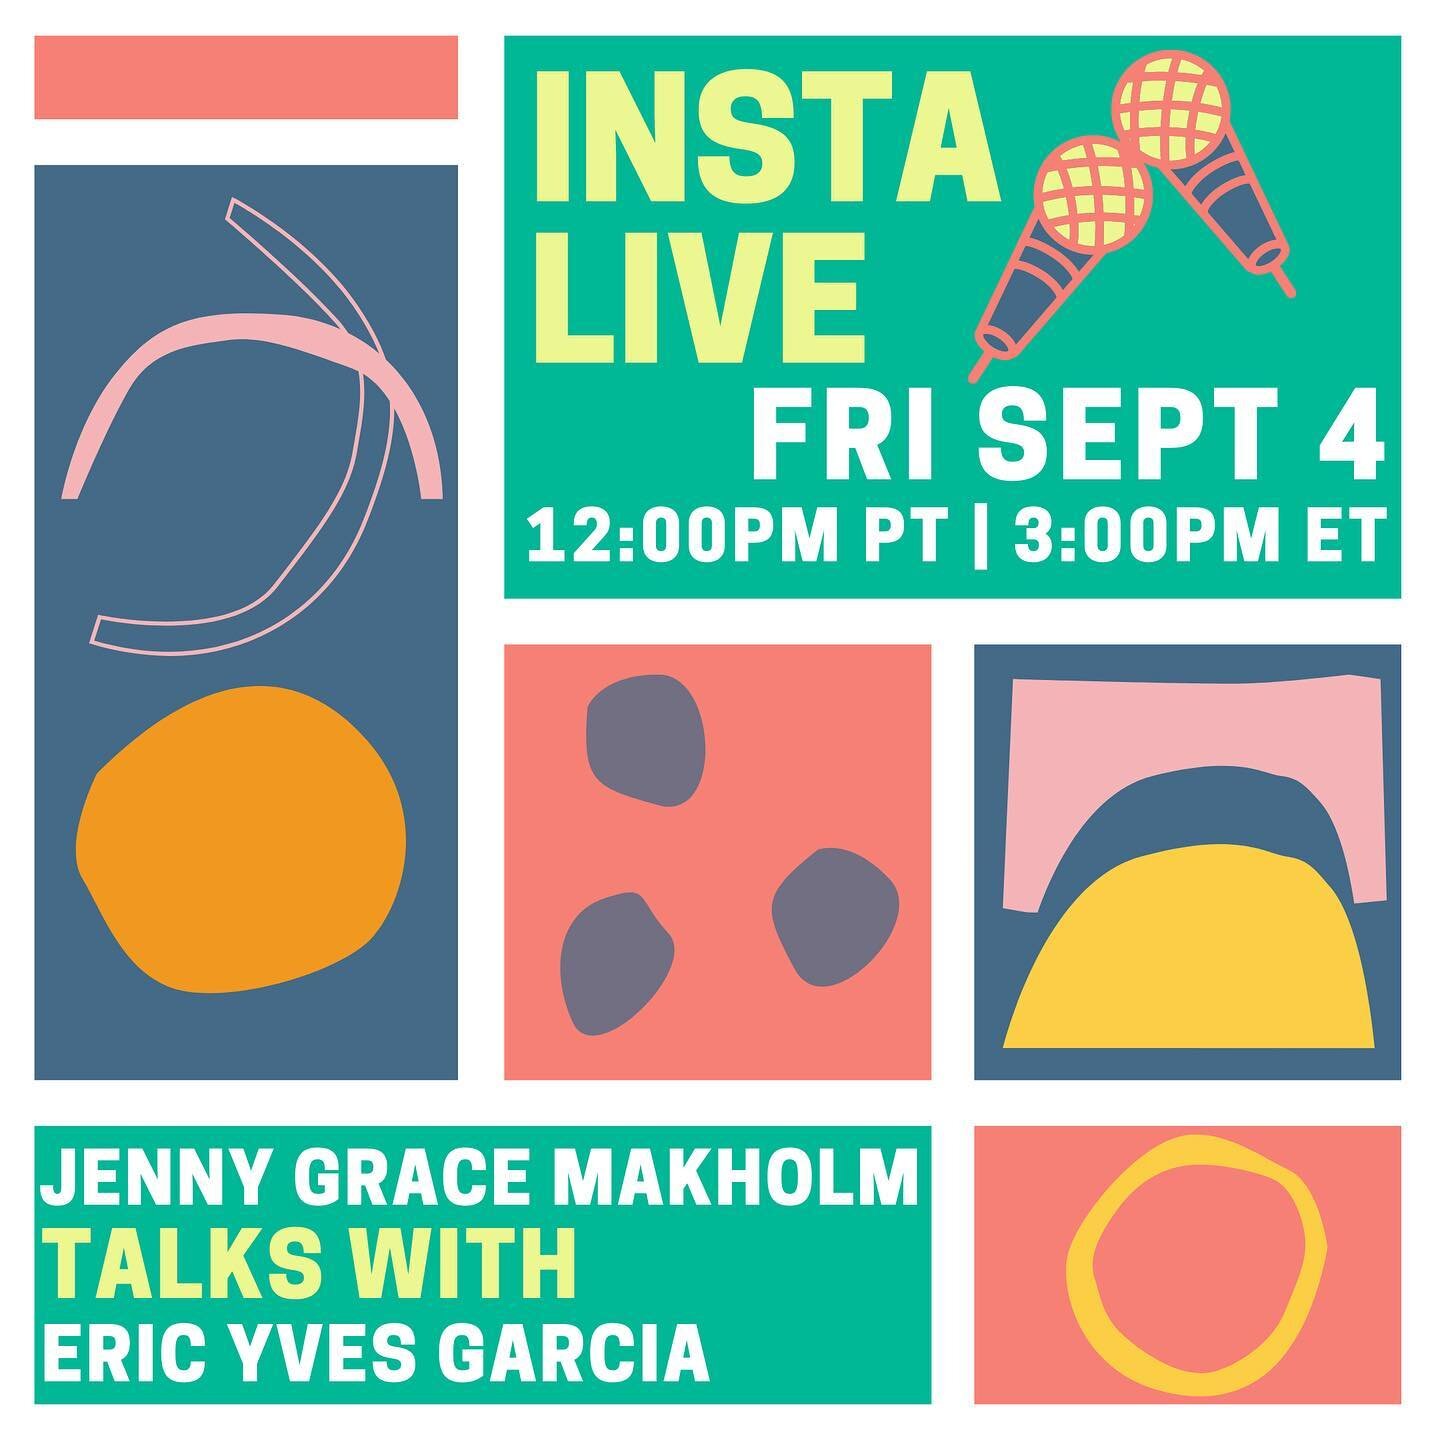 Today at 3PM ET/12PM PT, @jennygracem talks to @ericyvesgarcia about all things @beanartshero, why we need major Arts relief, and more! You don&rsquo;t want to miss this.

#ArtsHero #BeAnArtsHero #SaveTheArts #SaveTheArtsEconomy #ExtendPUA #ExtendFPU